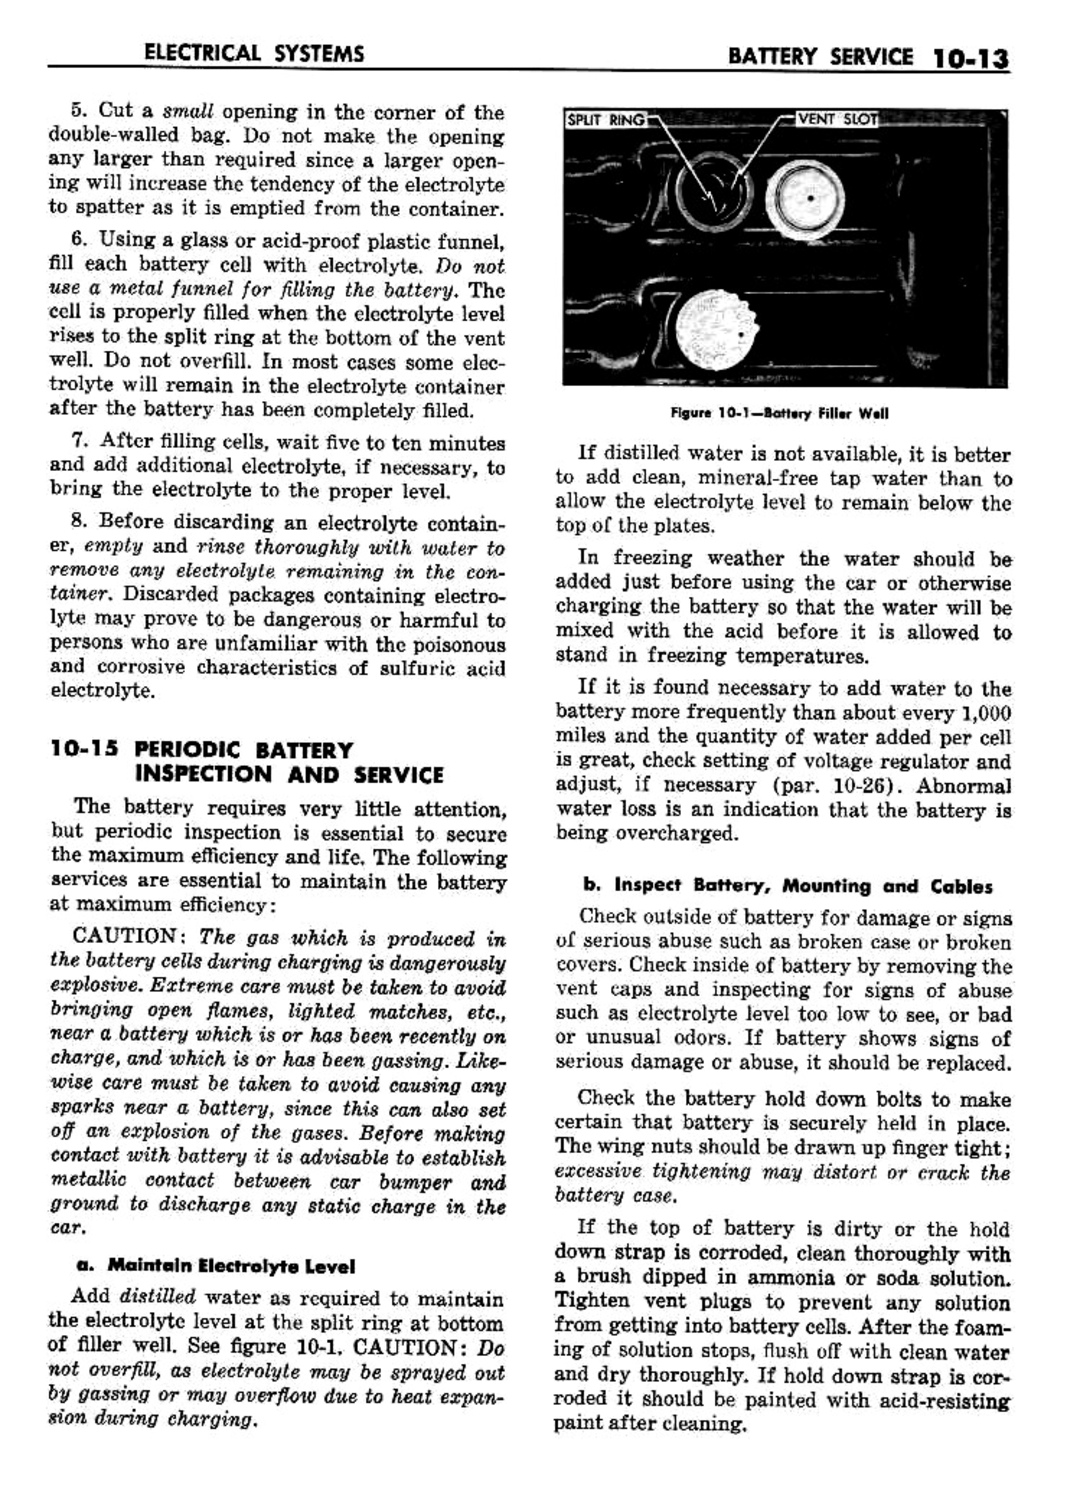 n_11 1960 Buick Shop Manual - Electrical Systems-013-013.jpg